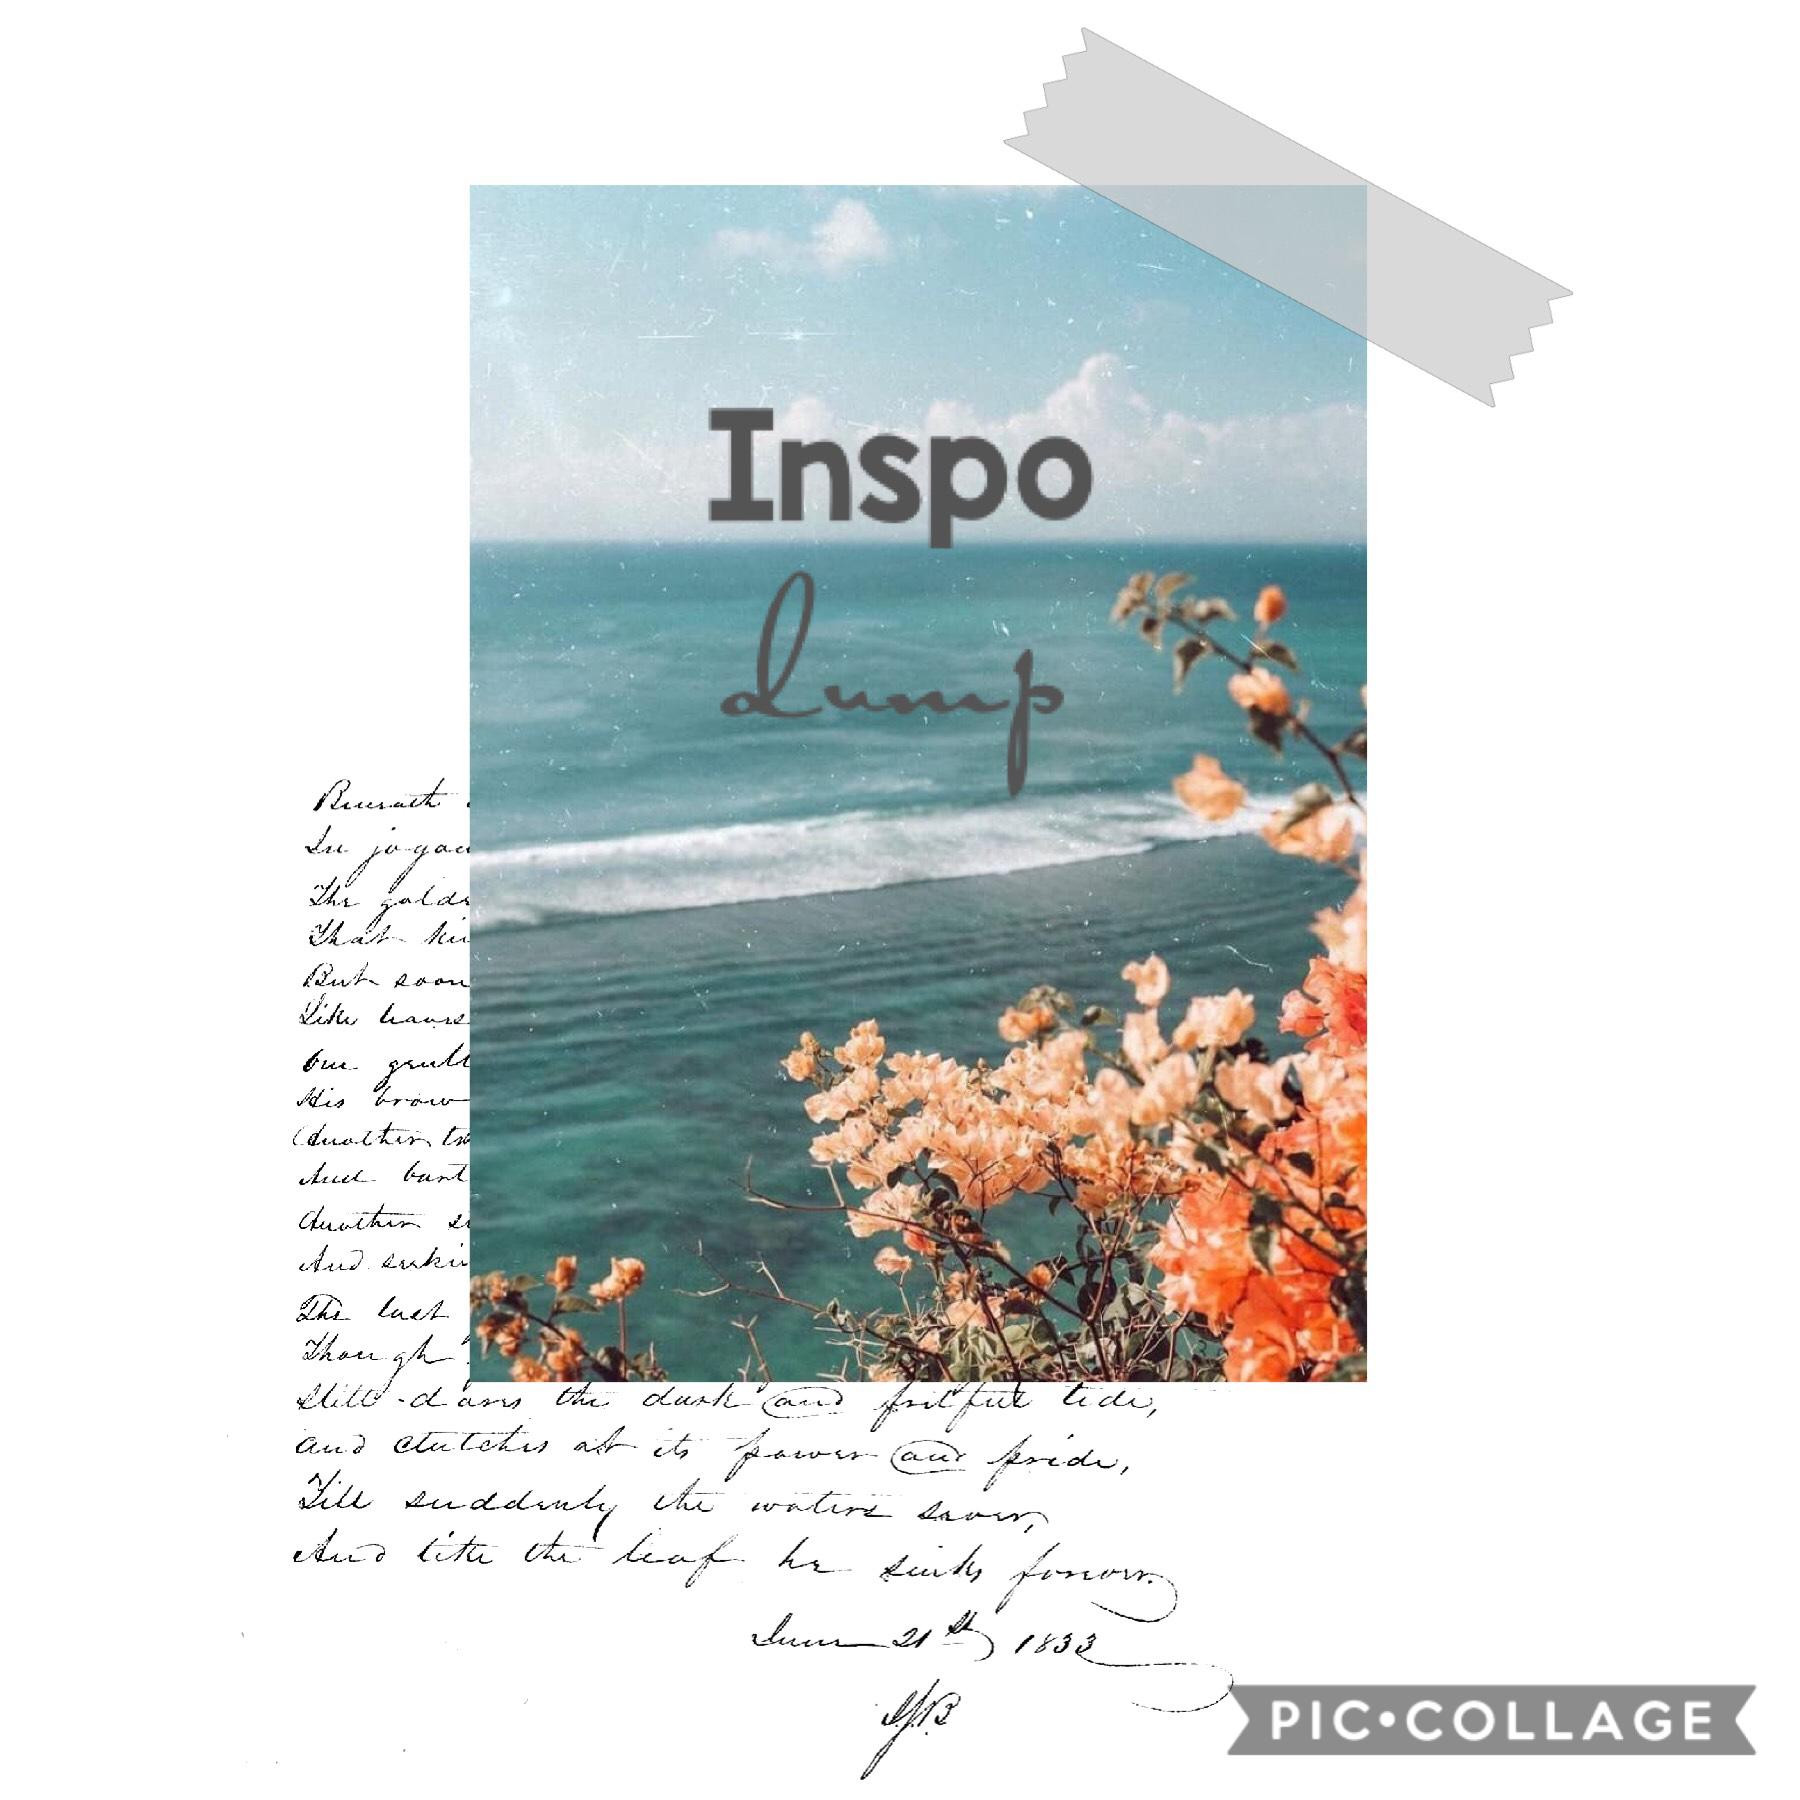 Hey guys! So right now I’m really low on inspo 😖 If you guys could maybe remix some backgrounds or quotes or pngs or ideas? Thank you 💕 Love Bec xx